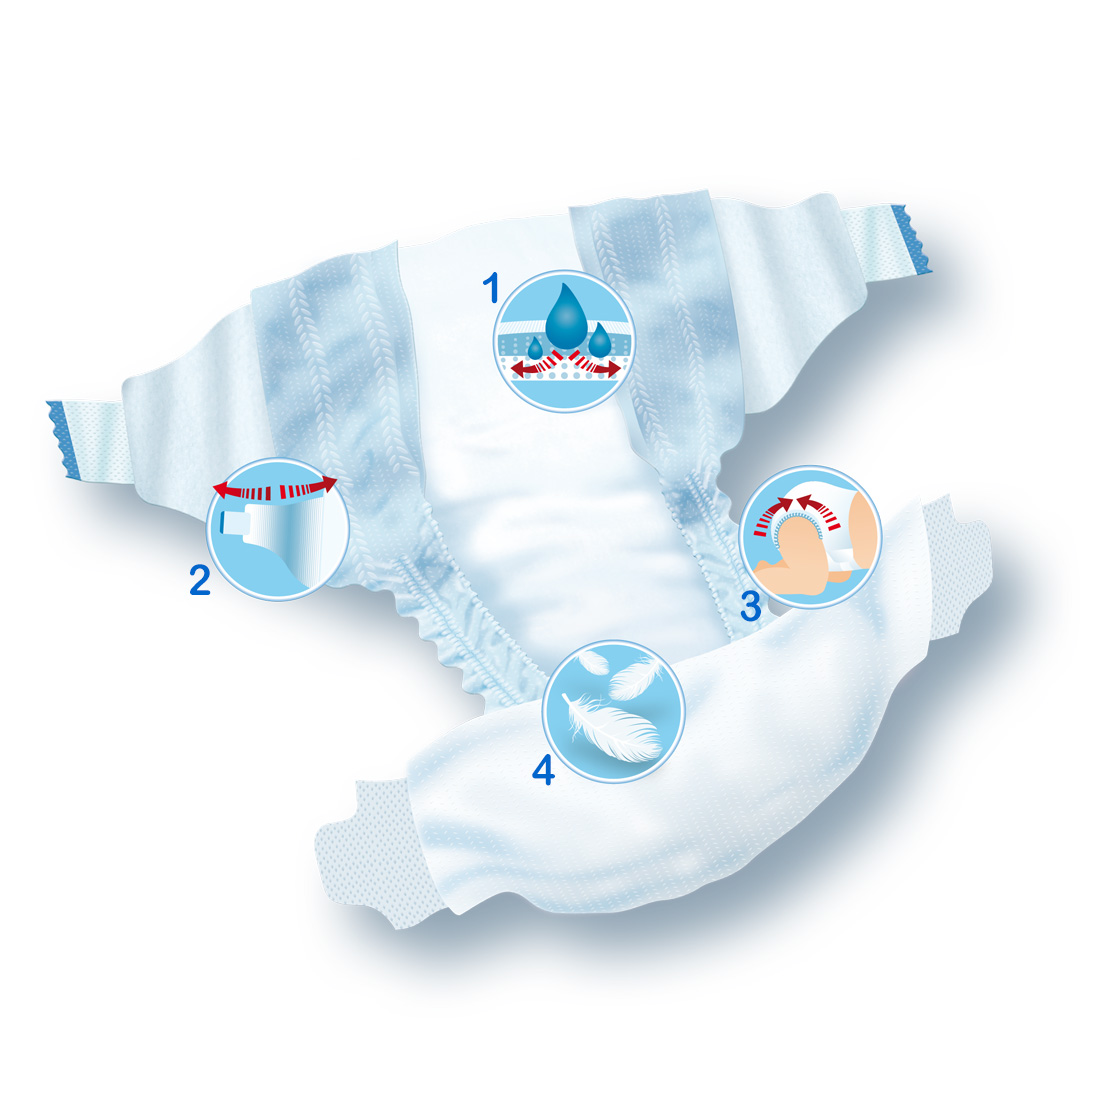 pampers 3 50 szt